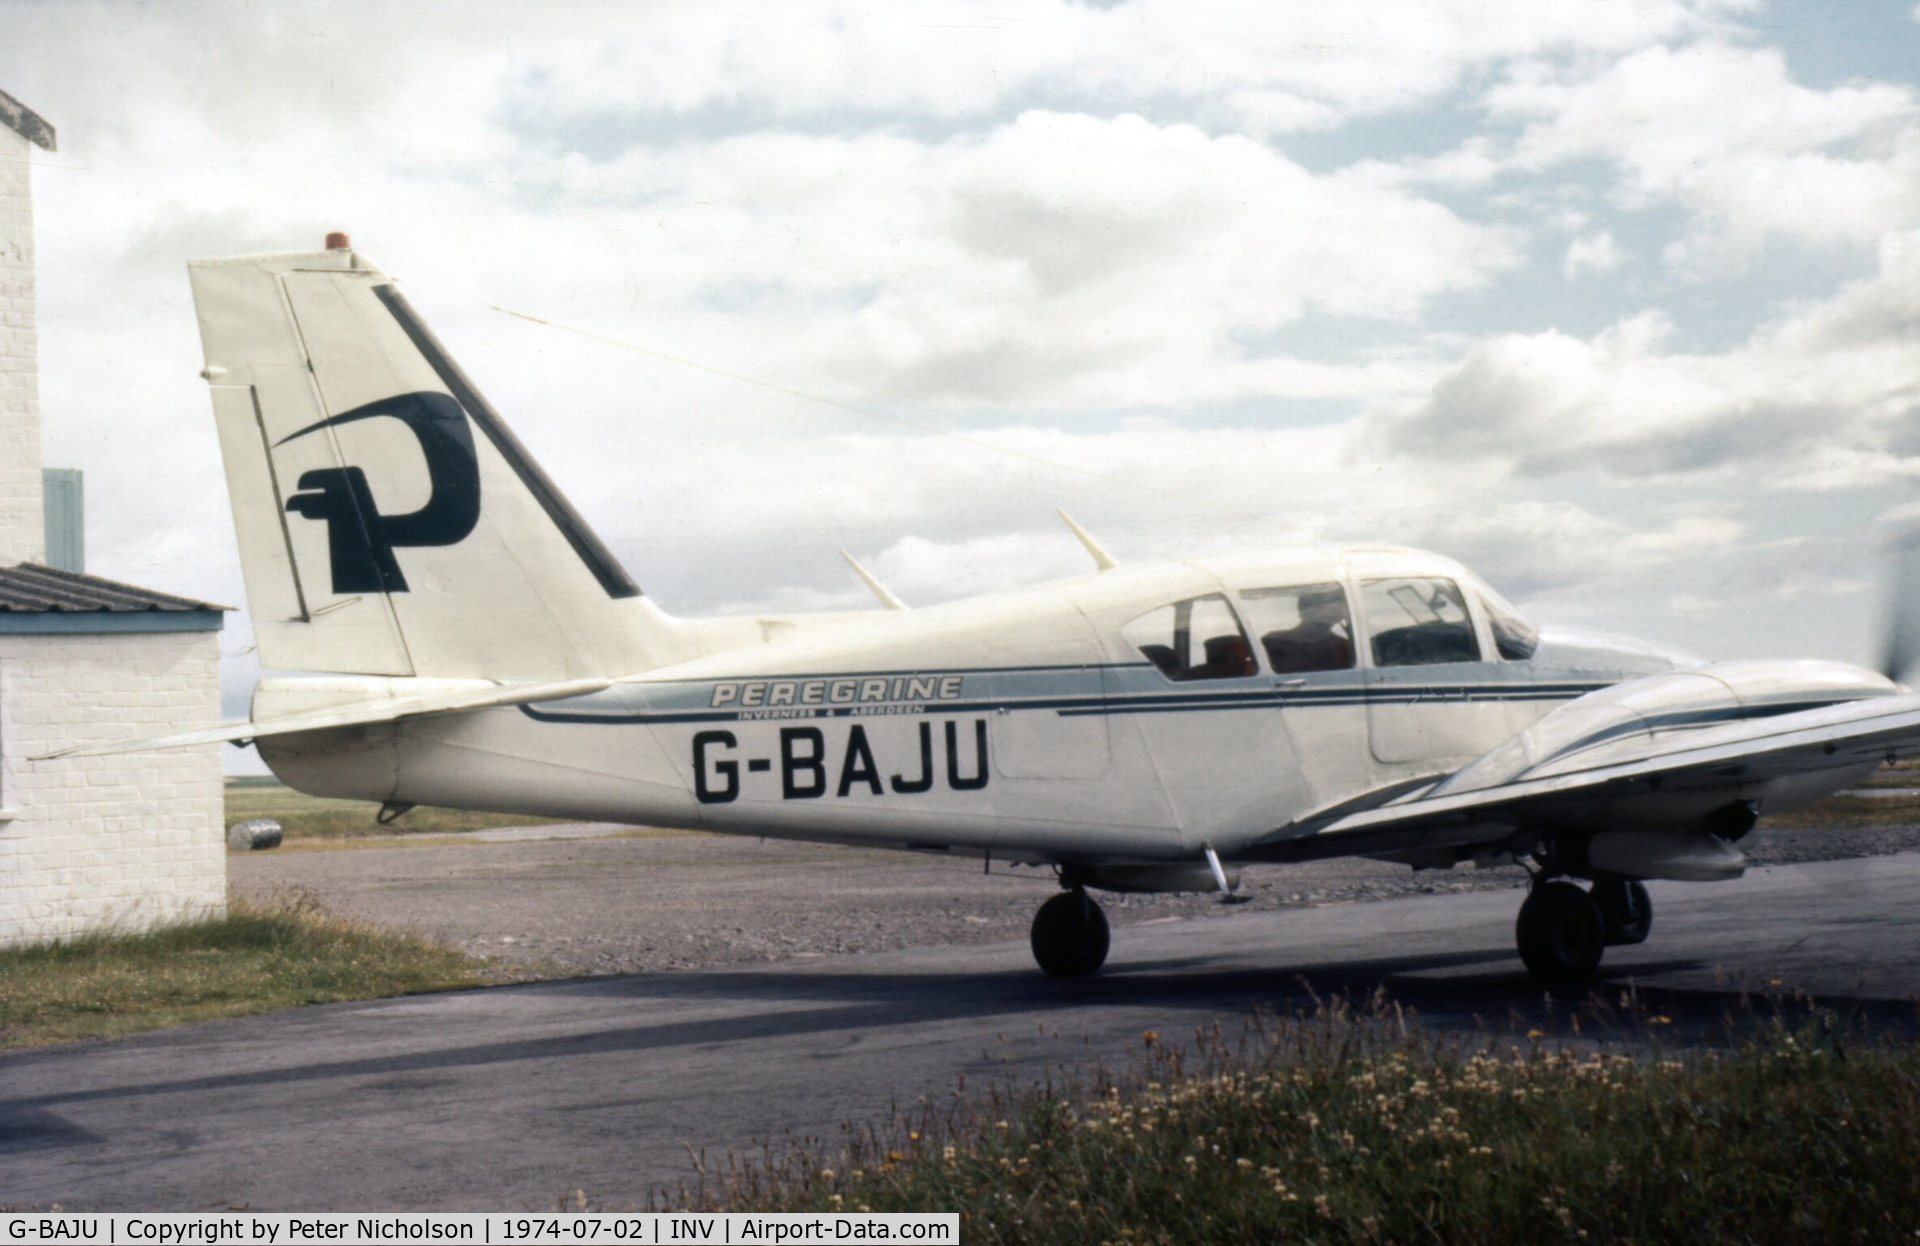 G-BAJU, 1964 Piper PA-23-250 Aztec C/N 27-2546, PA-23 Aztec of Peregrine Air Services at Inverness in the Summer of 1974.